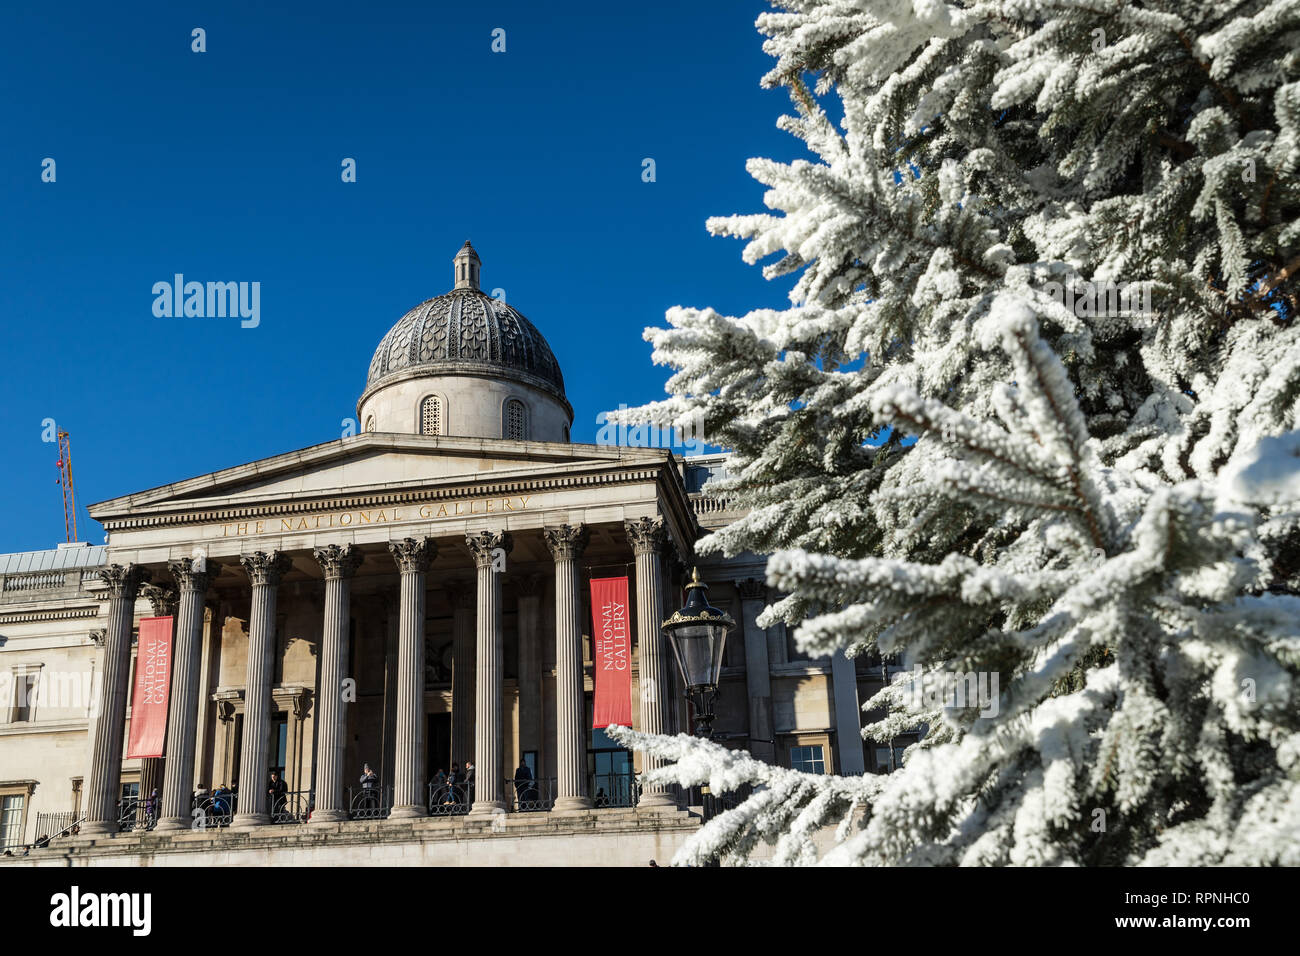 Snow and winter decorations in Trafalgar Square Stock Photo